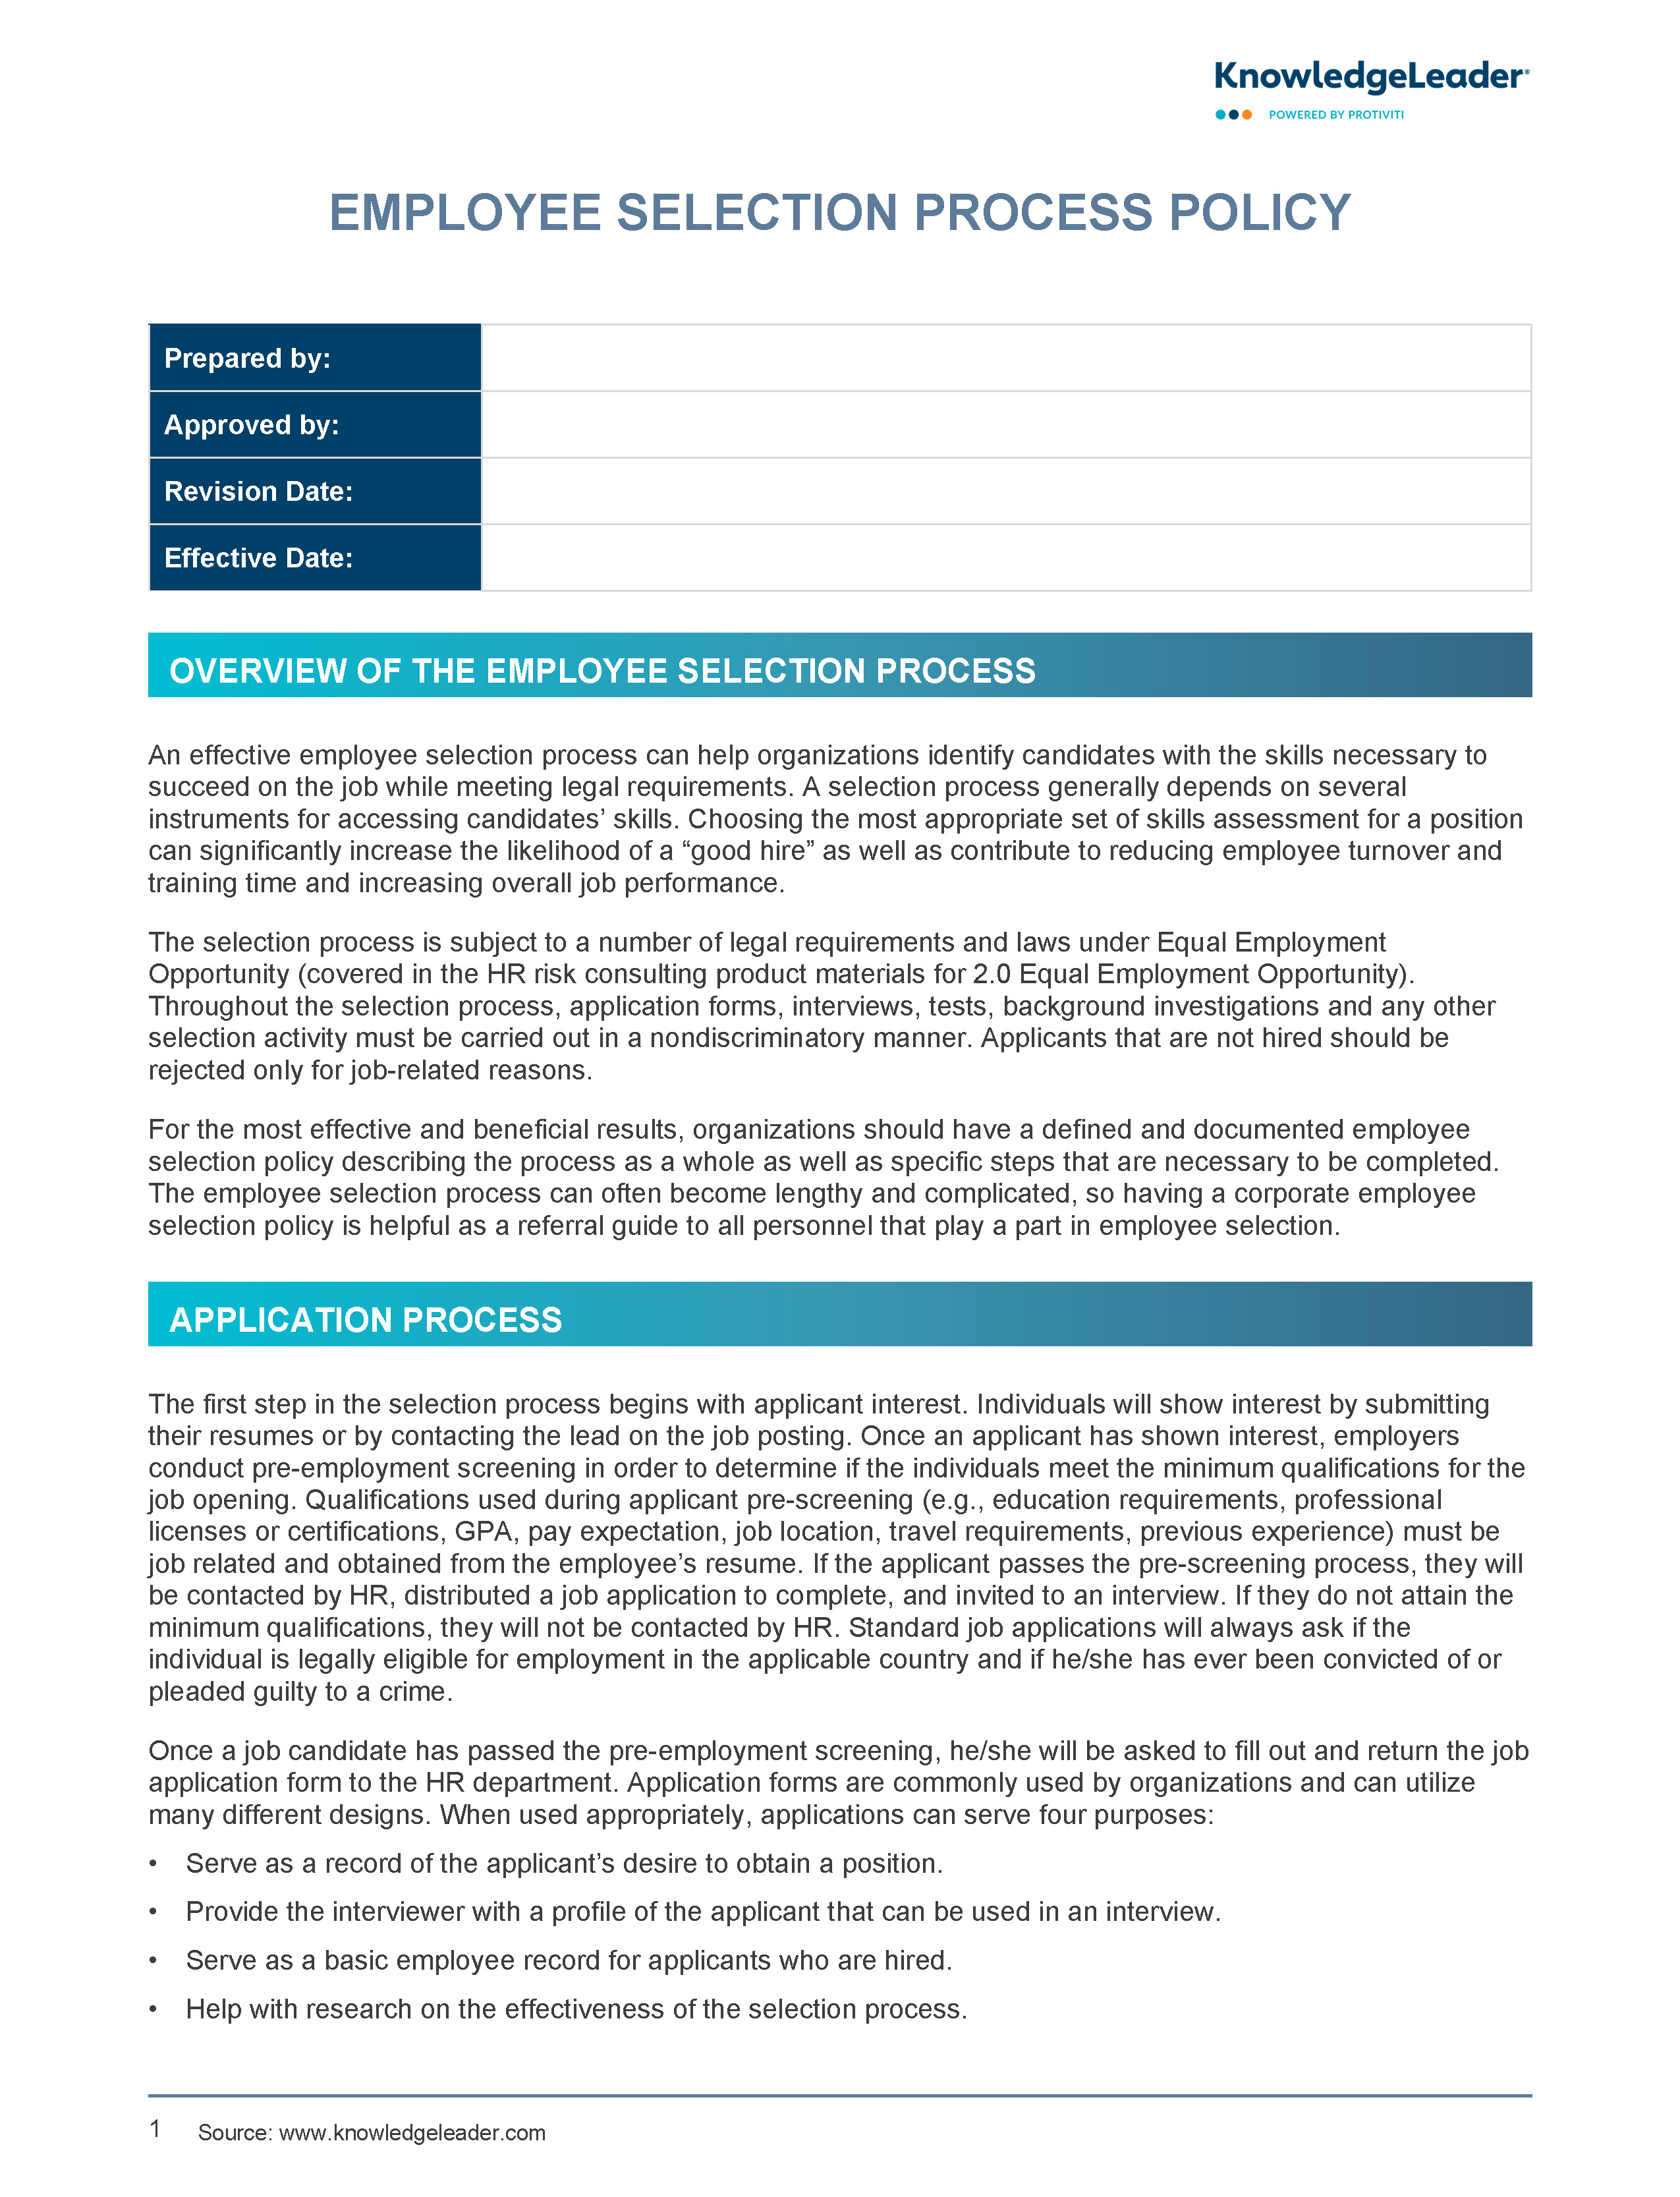 Screenshot of the first page of Employee Selection Policy